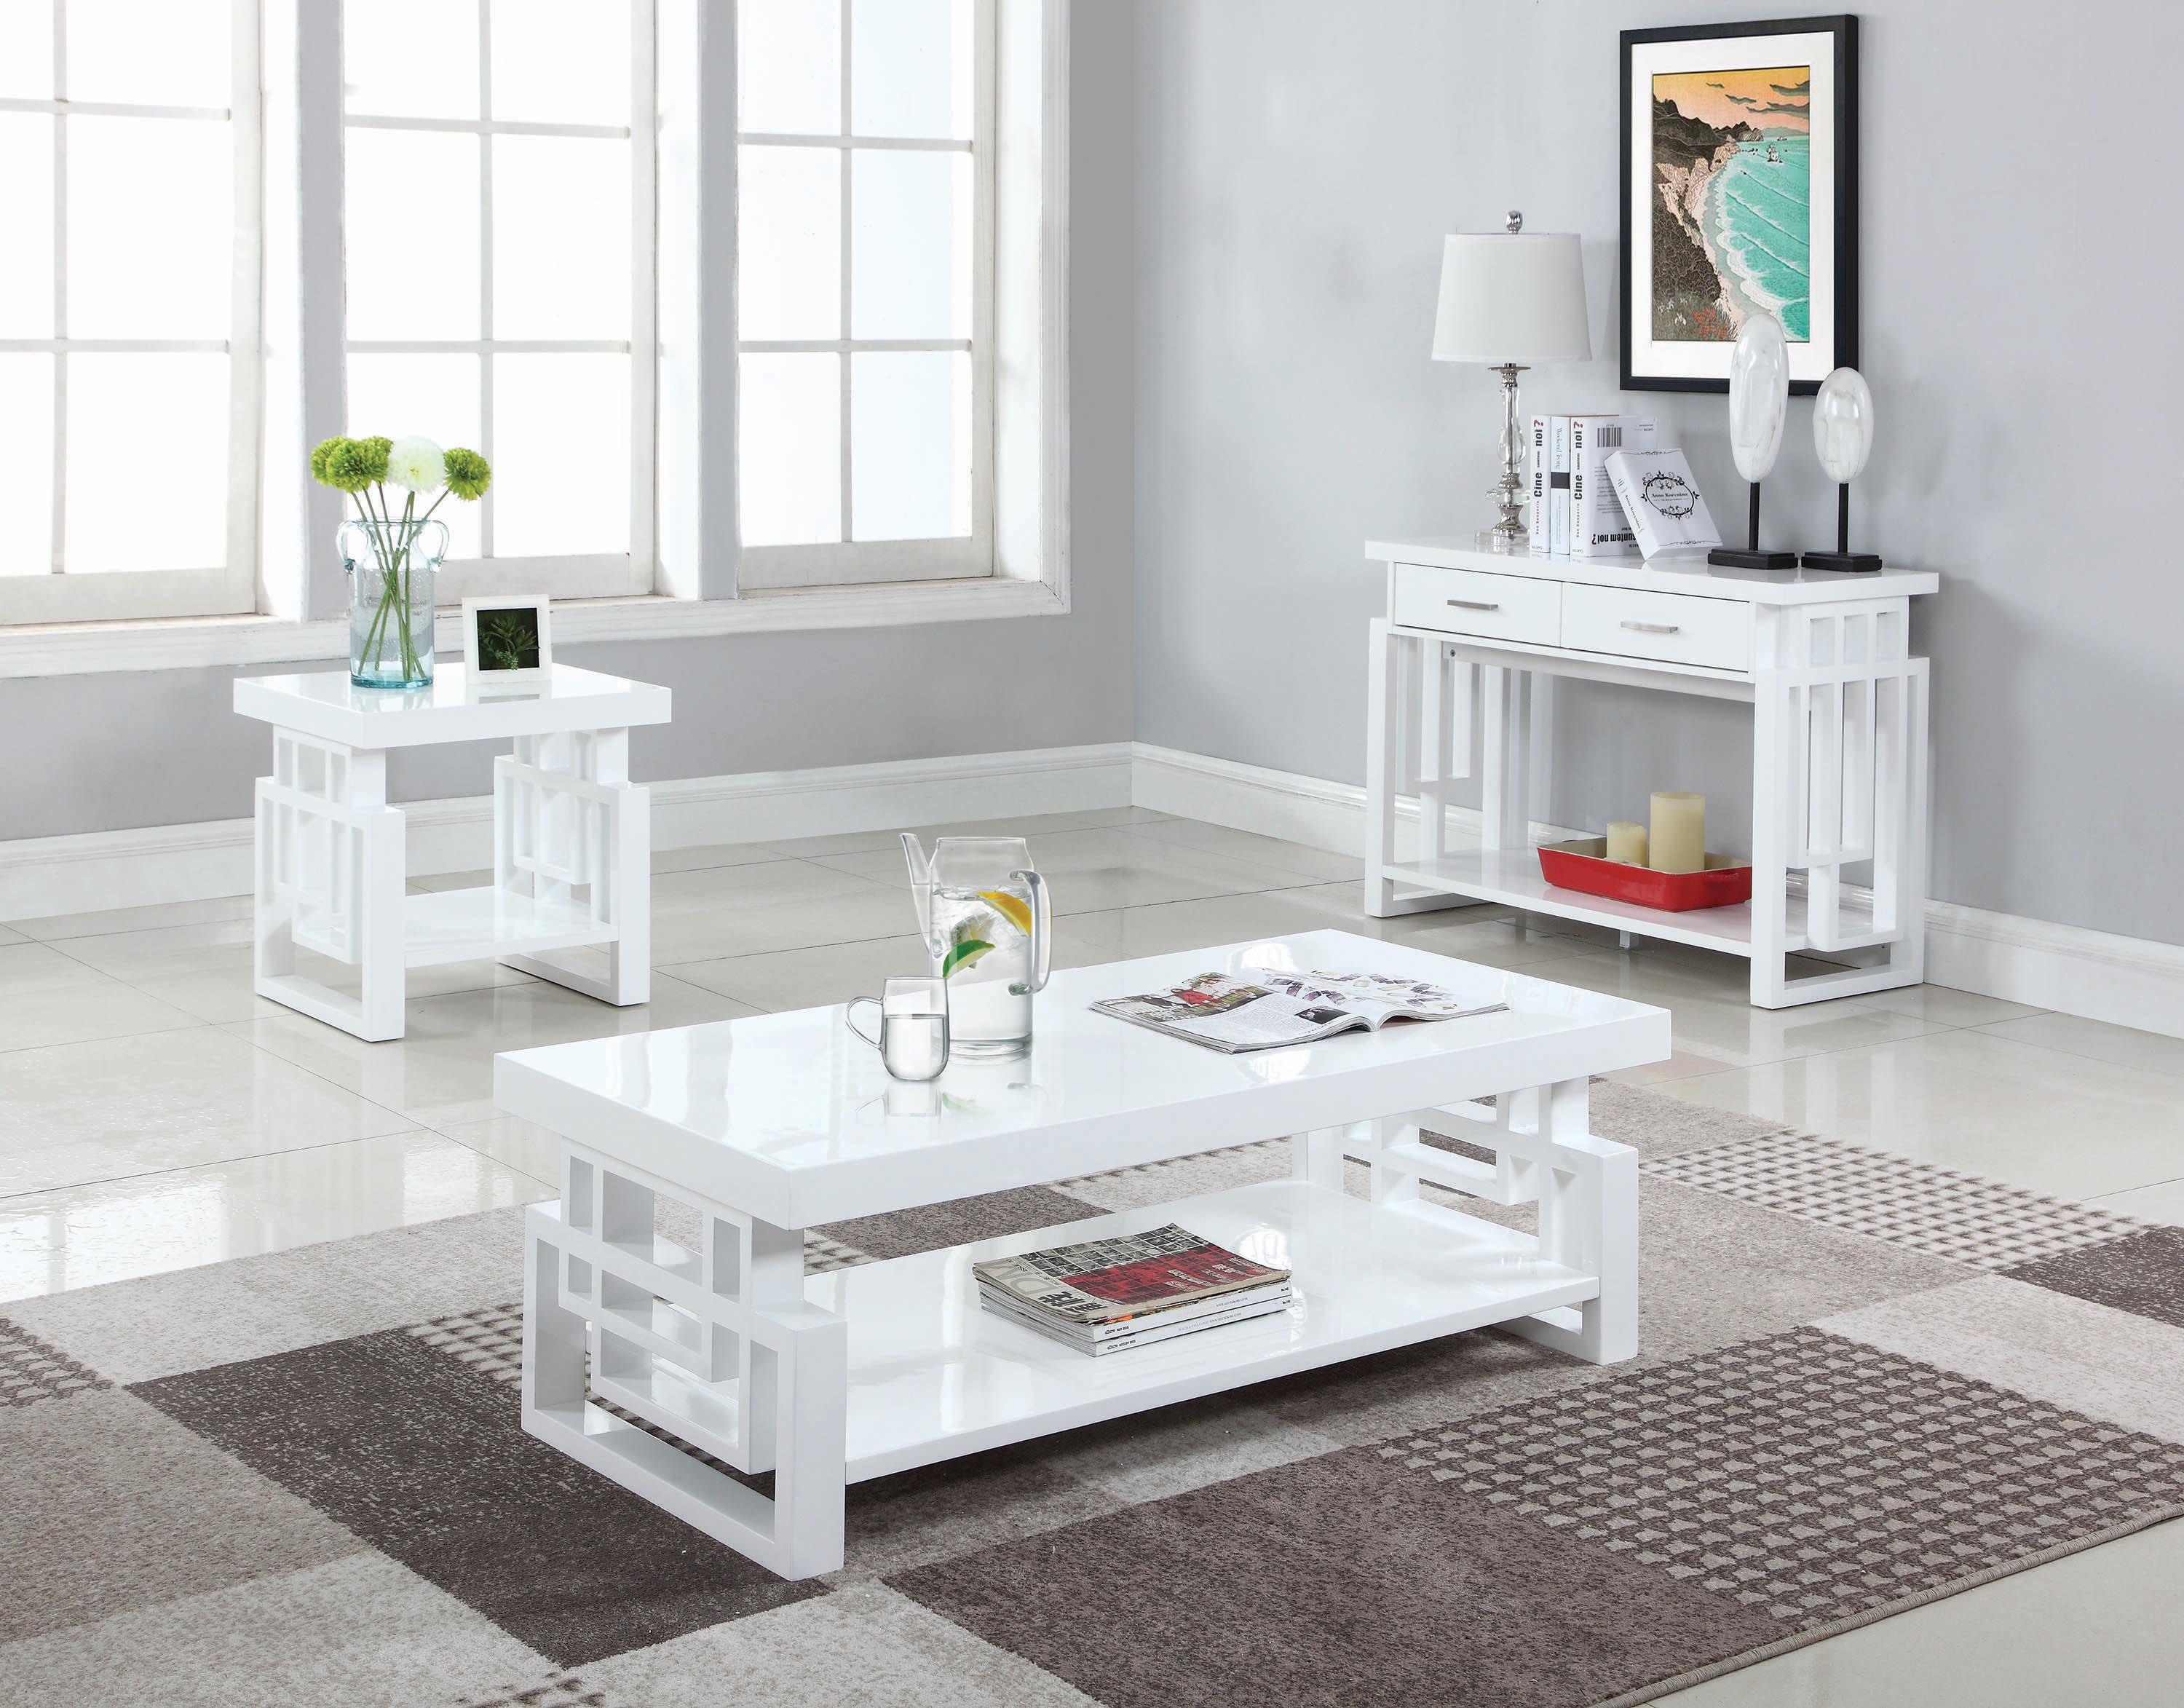 Transitional Coffee Table Set 705708-S3 705708-S3 in White 